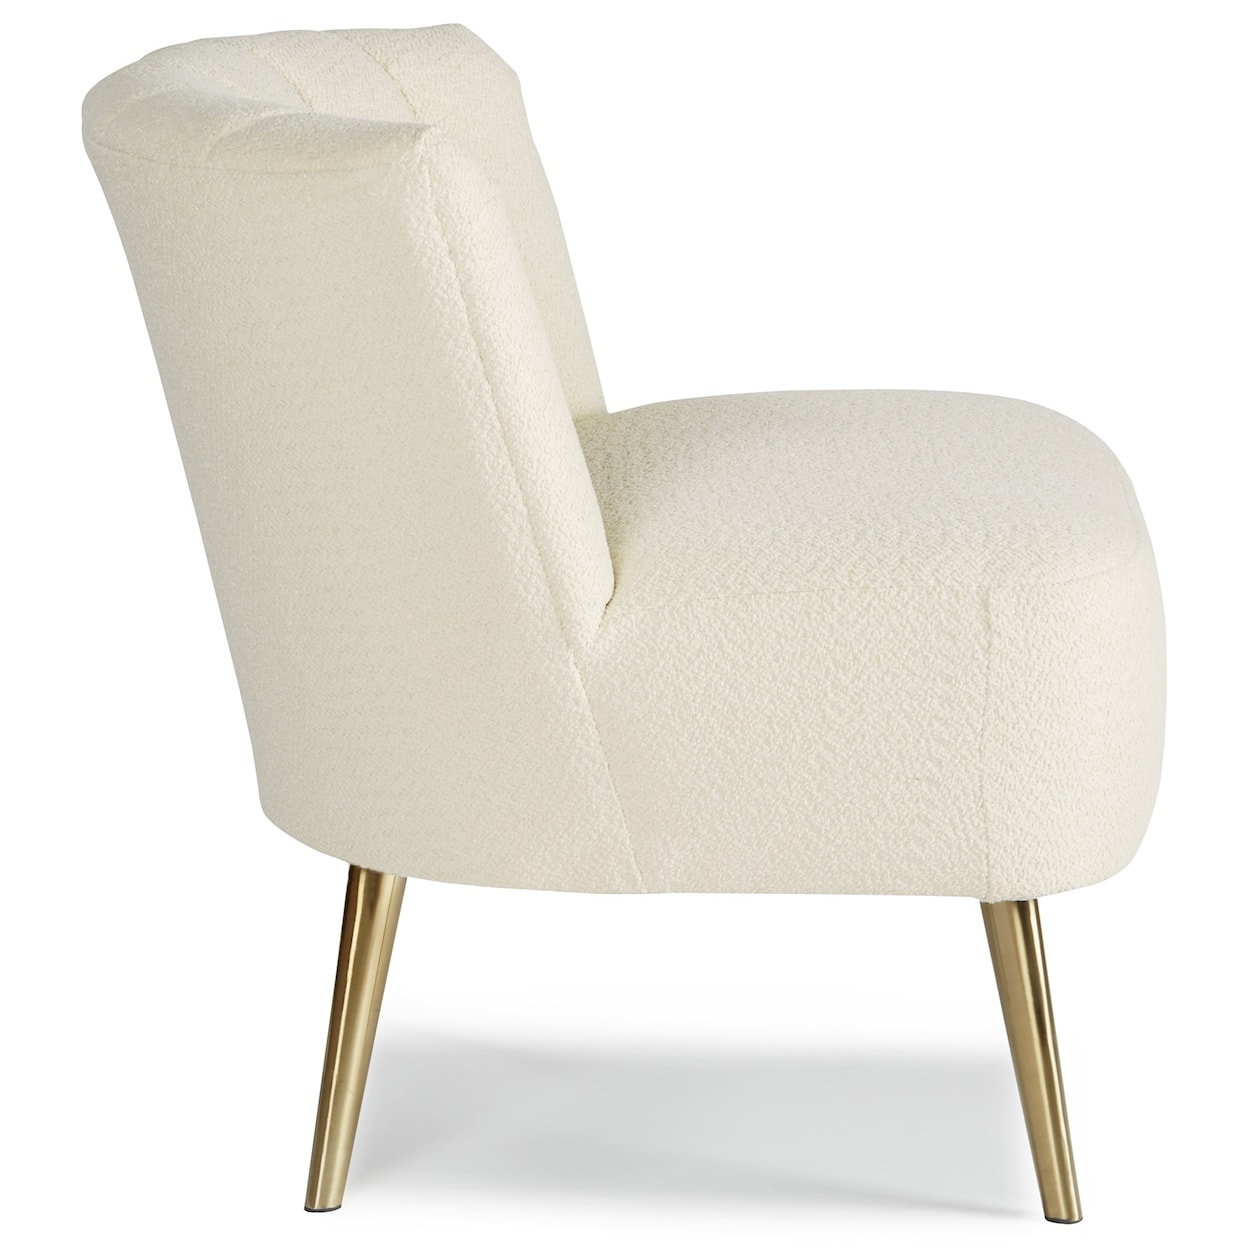 Best Home Furnishings Best Xpress - Ameretta Accent Chair